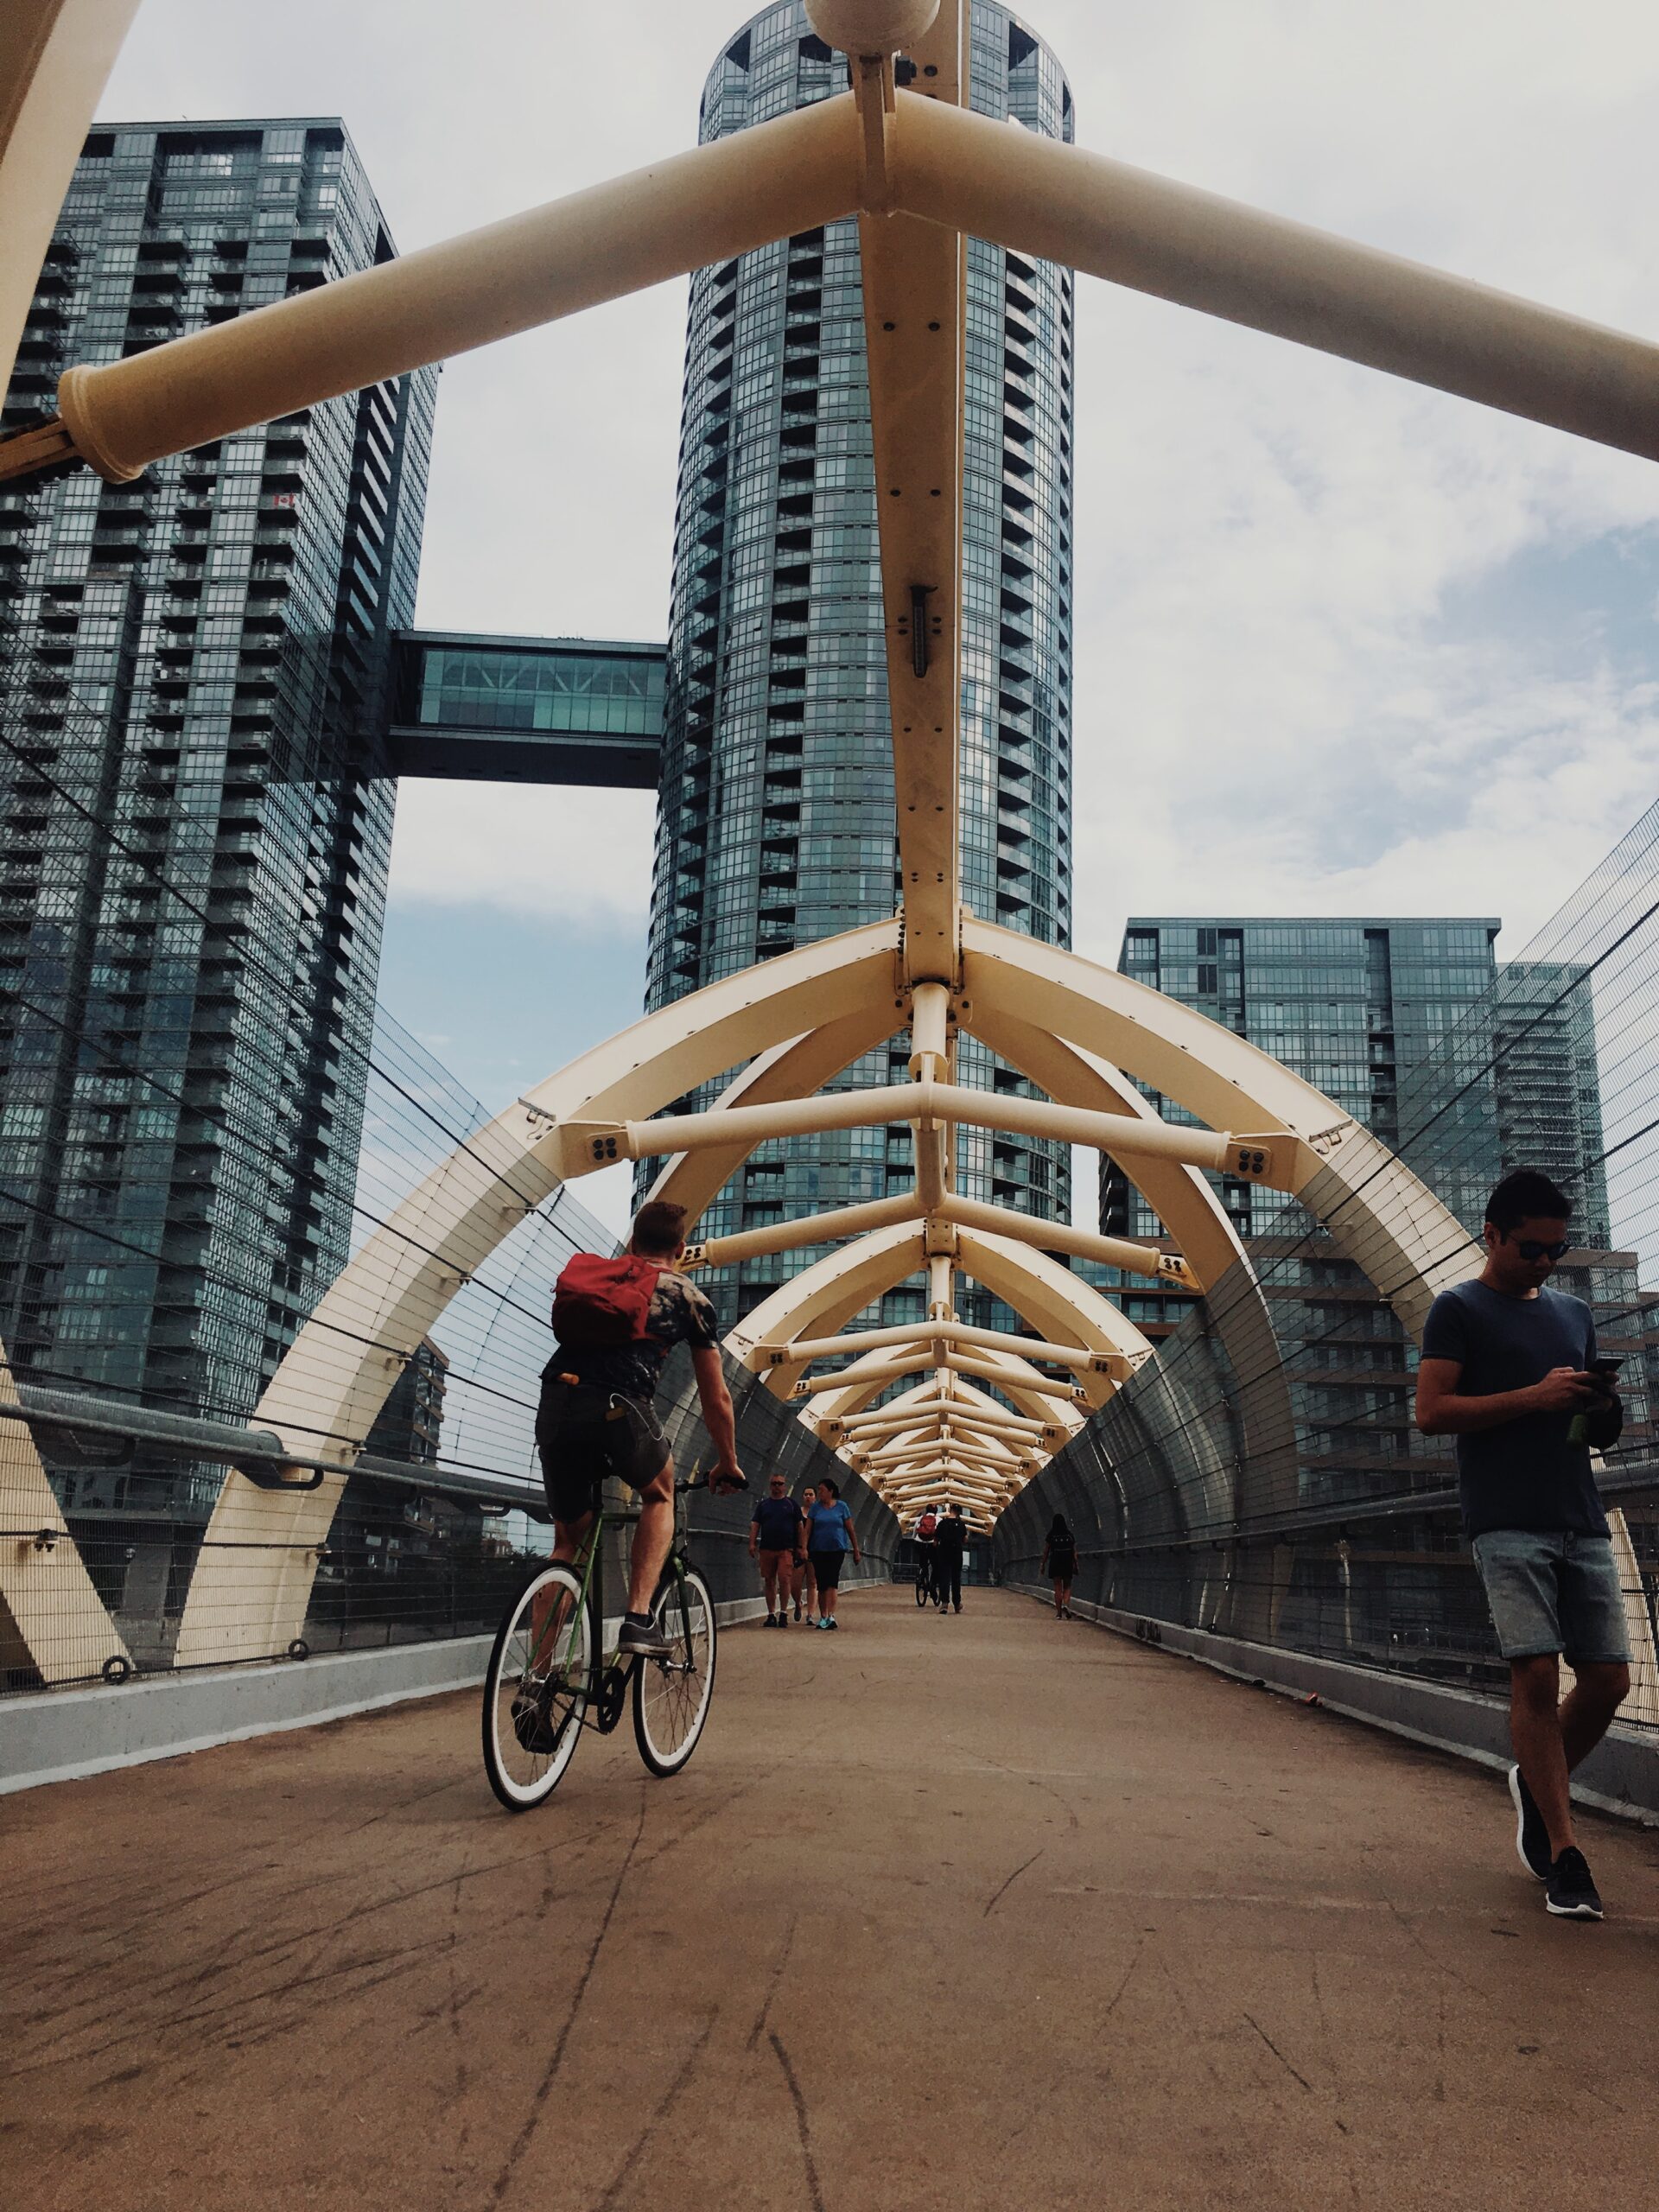 A view looking down the "Puente De Luz" bridge designed by Francisco Gazitua; there is a cyclist on the left and numerous pedestrians; condos in the background